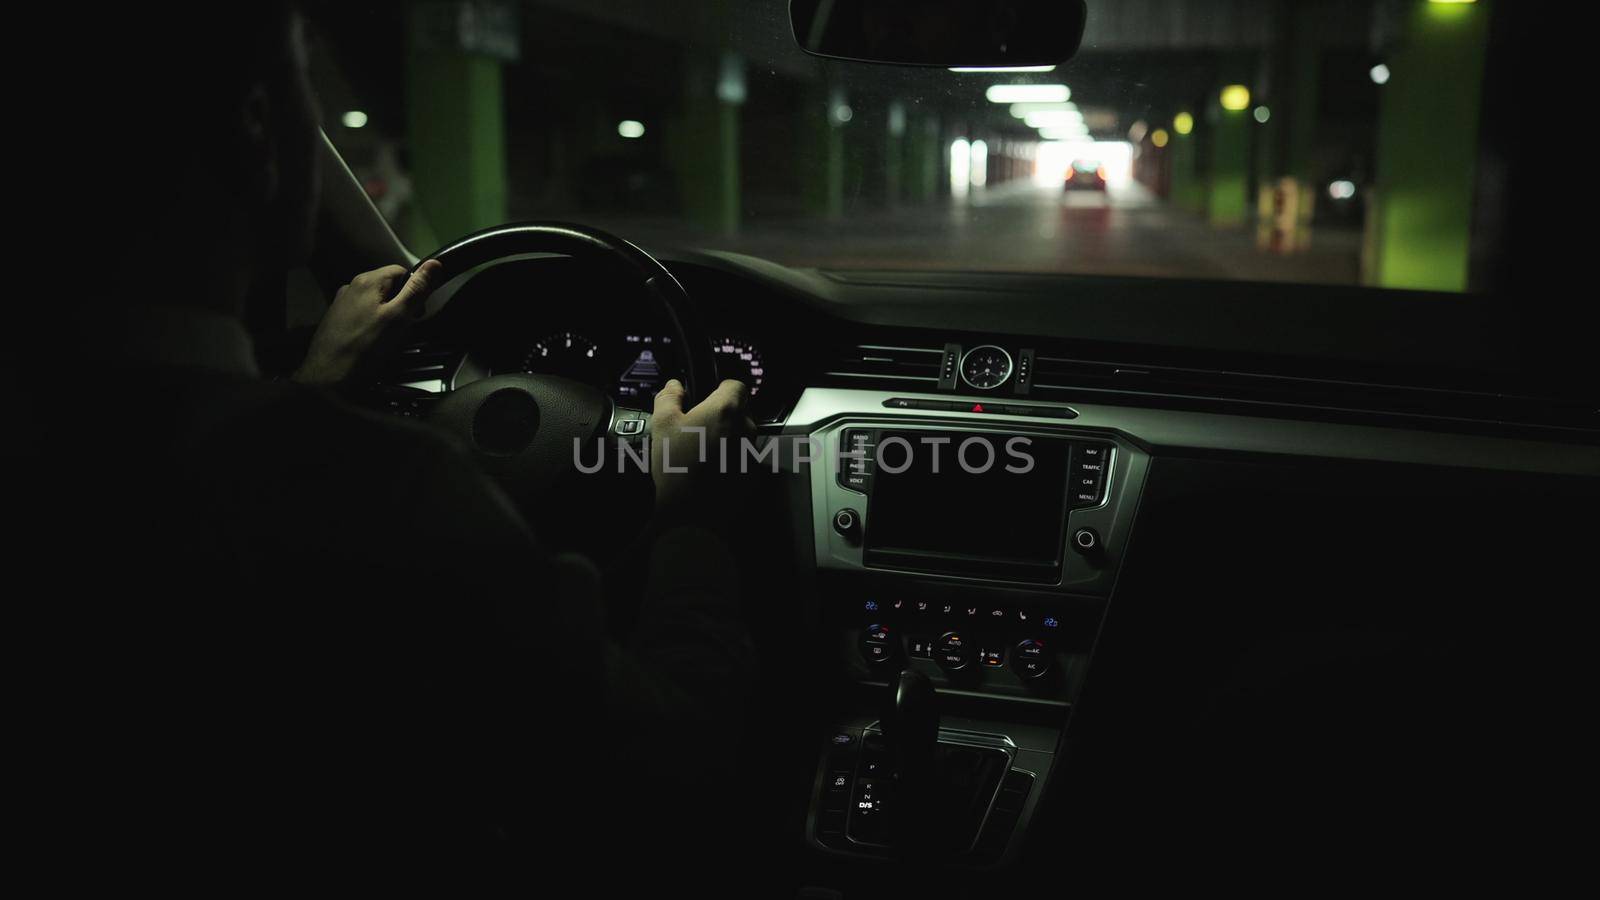 Man driving car on parking space, hands turning steering wheel. Adult man rides in modern car by underground parking. Man driving car through an underground parking lot looking for a place to park.